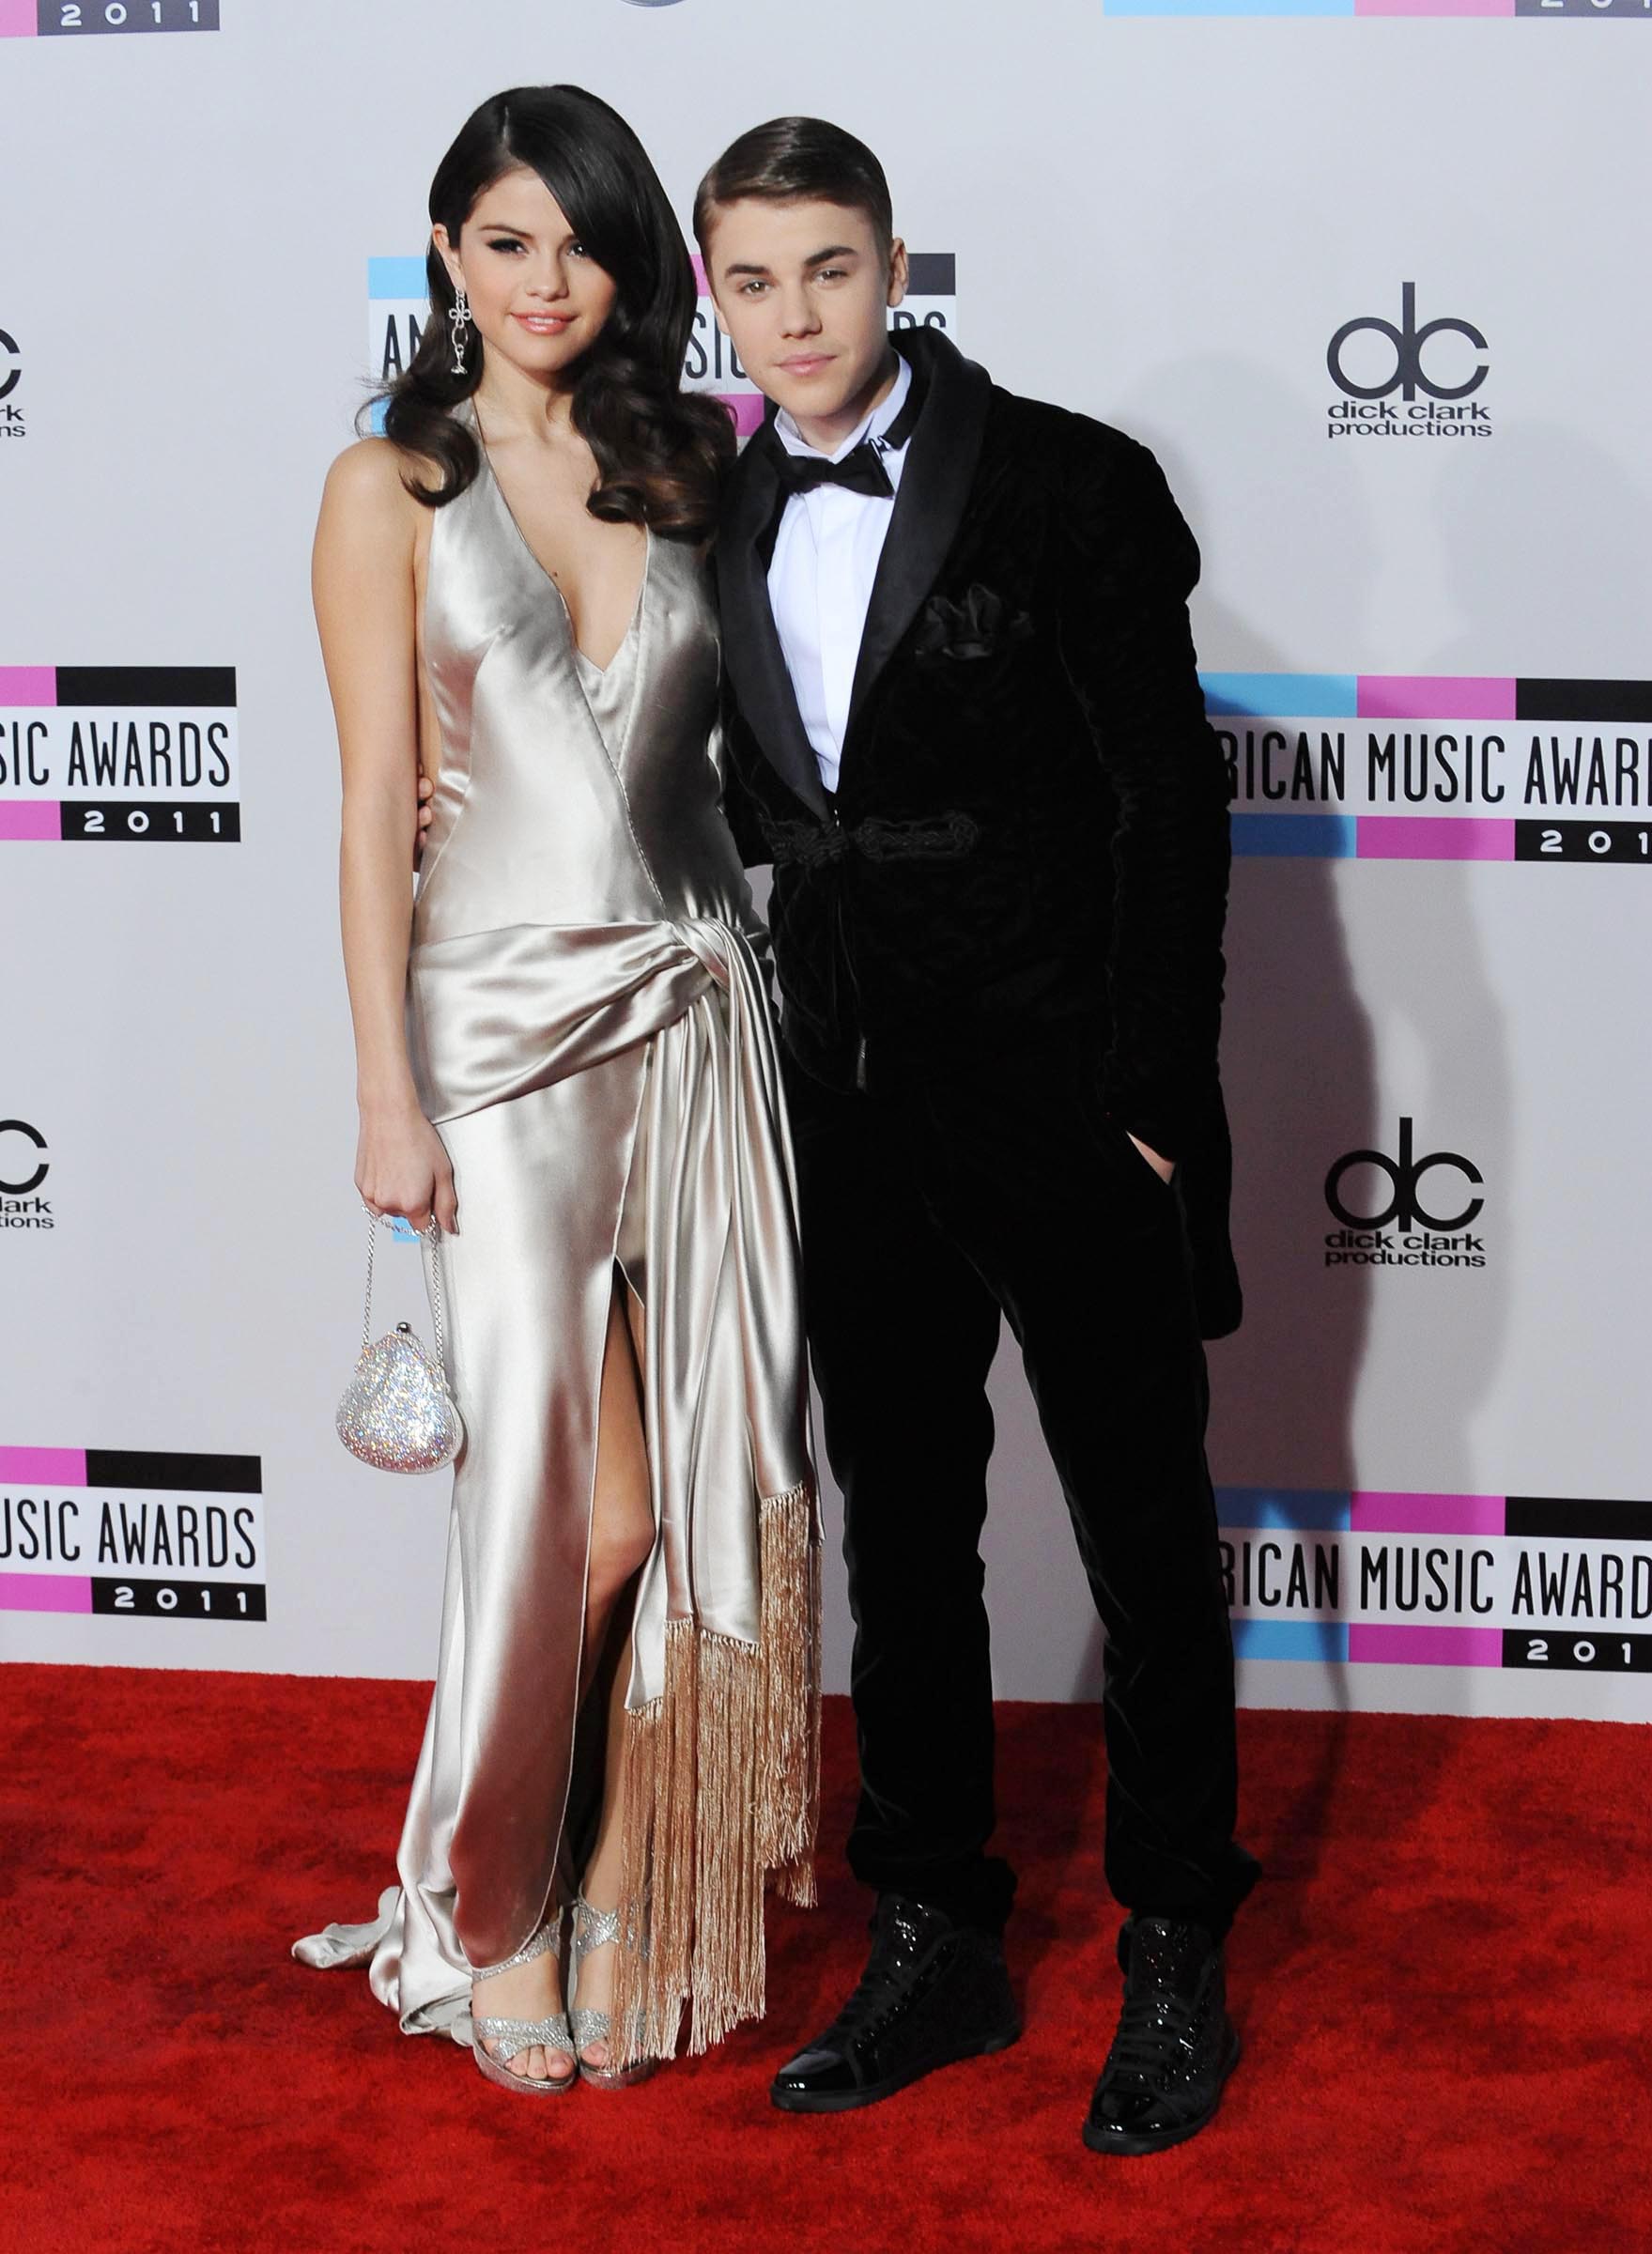 A throwback photo of a younger version of Selena Gomez and Justin Bieber at a red carpet event and they looks amazing.